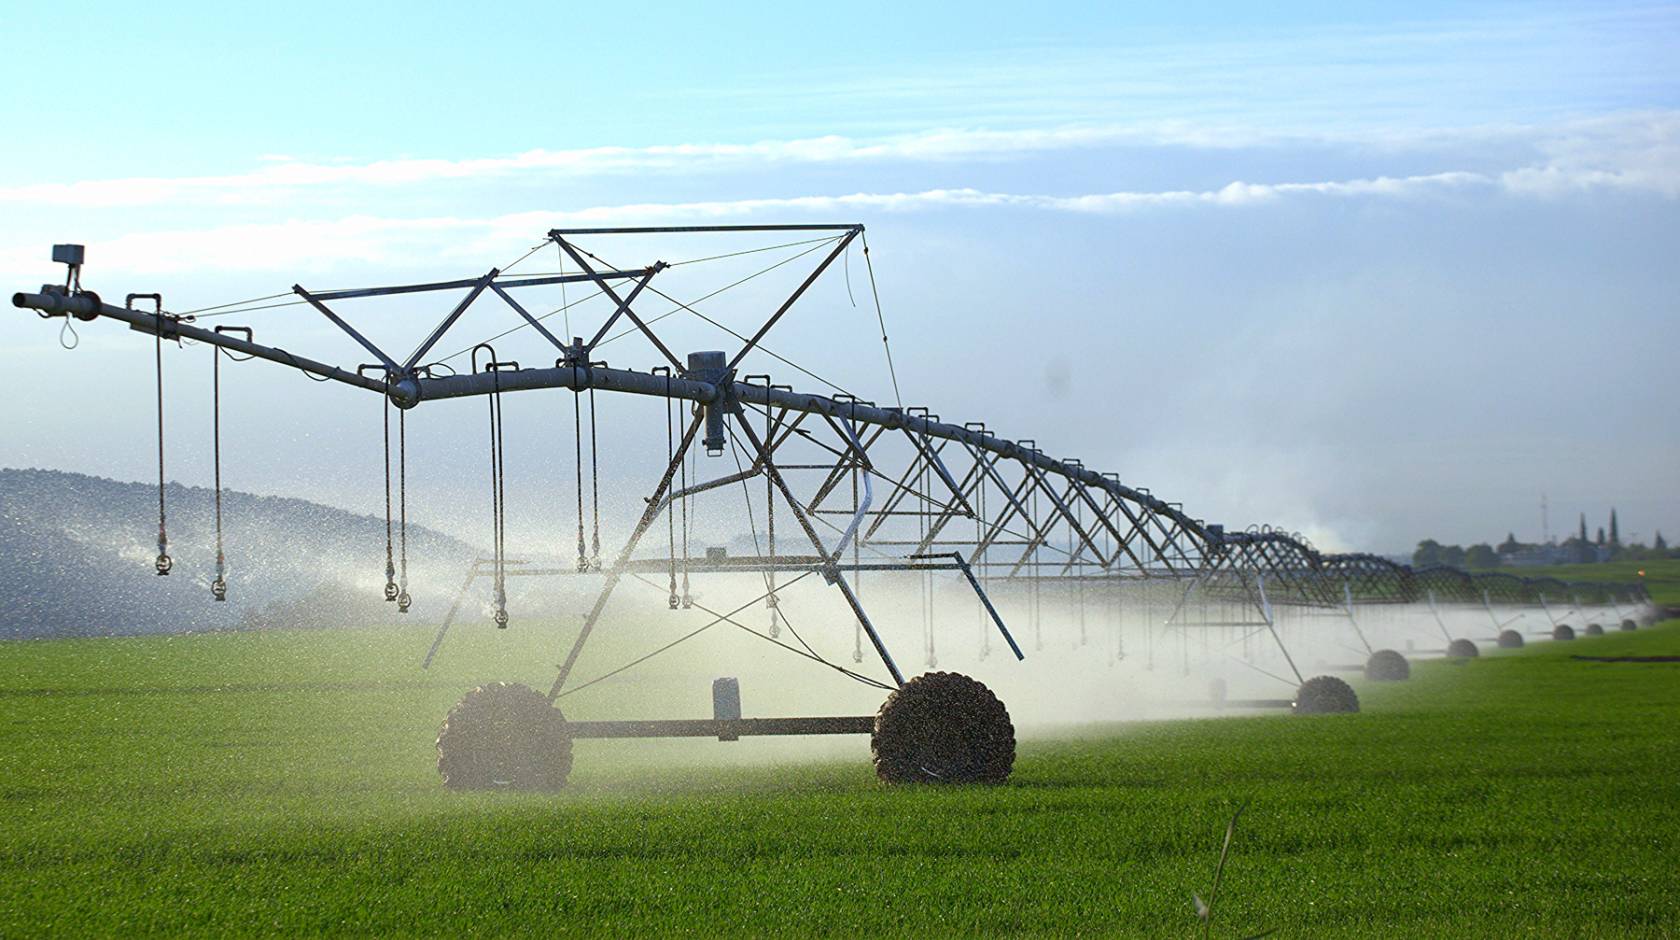 A spray irrigation system of metal irrigation equipment on a green field with mountains and clouds in the background